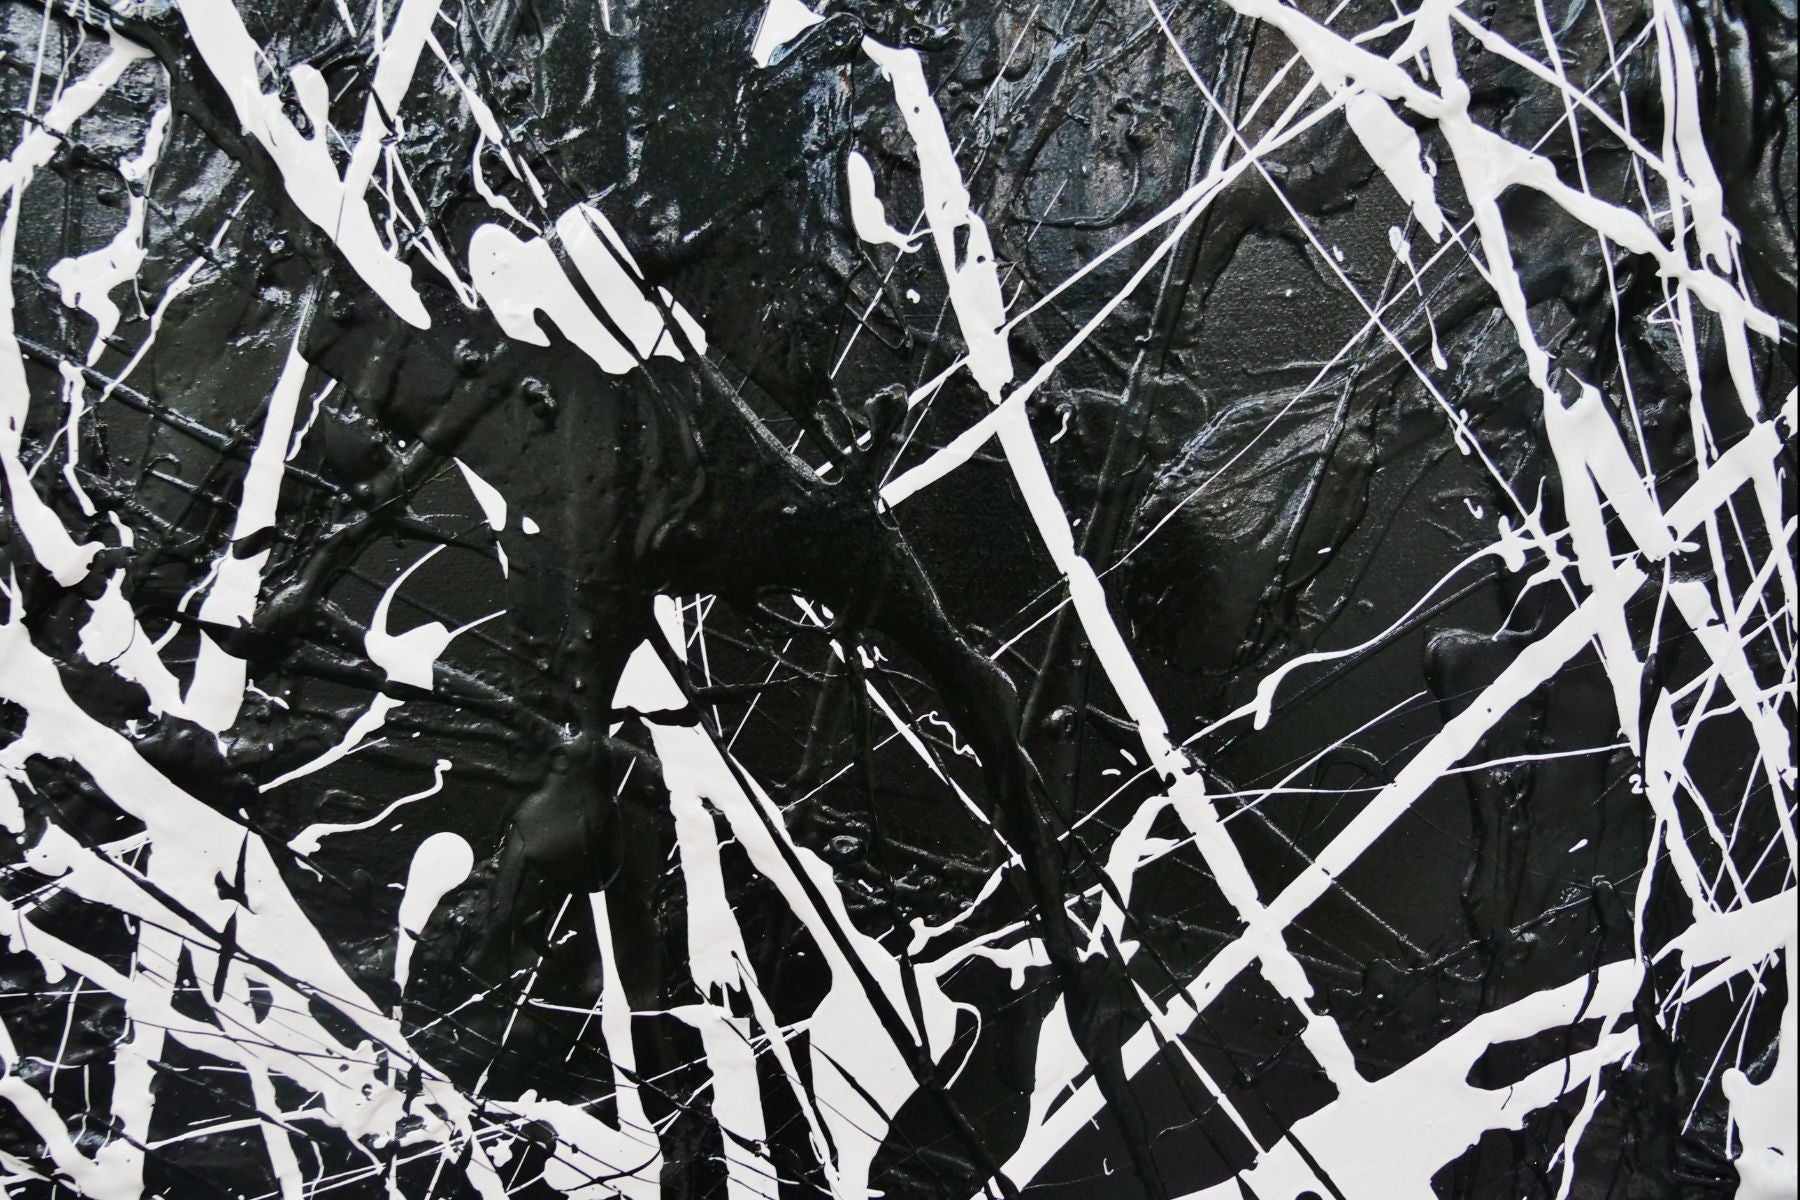 Brain Scatter 240cm x 120cm Black White Textured Abstract Painting (SOLD)